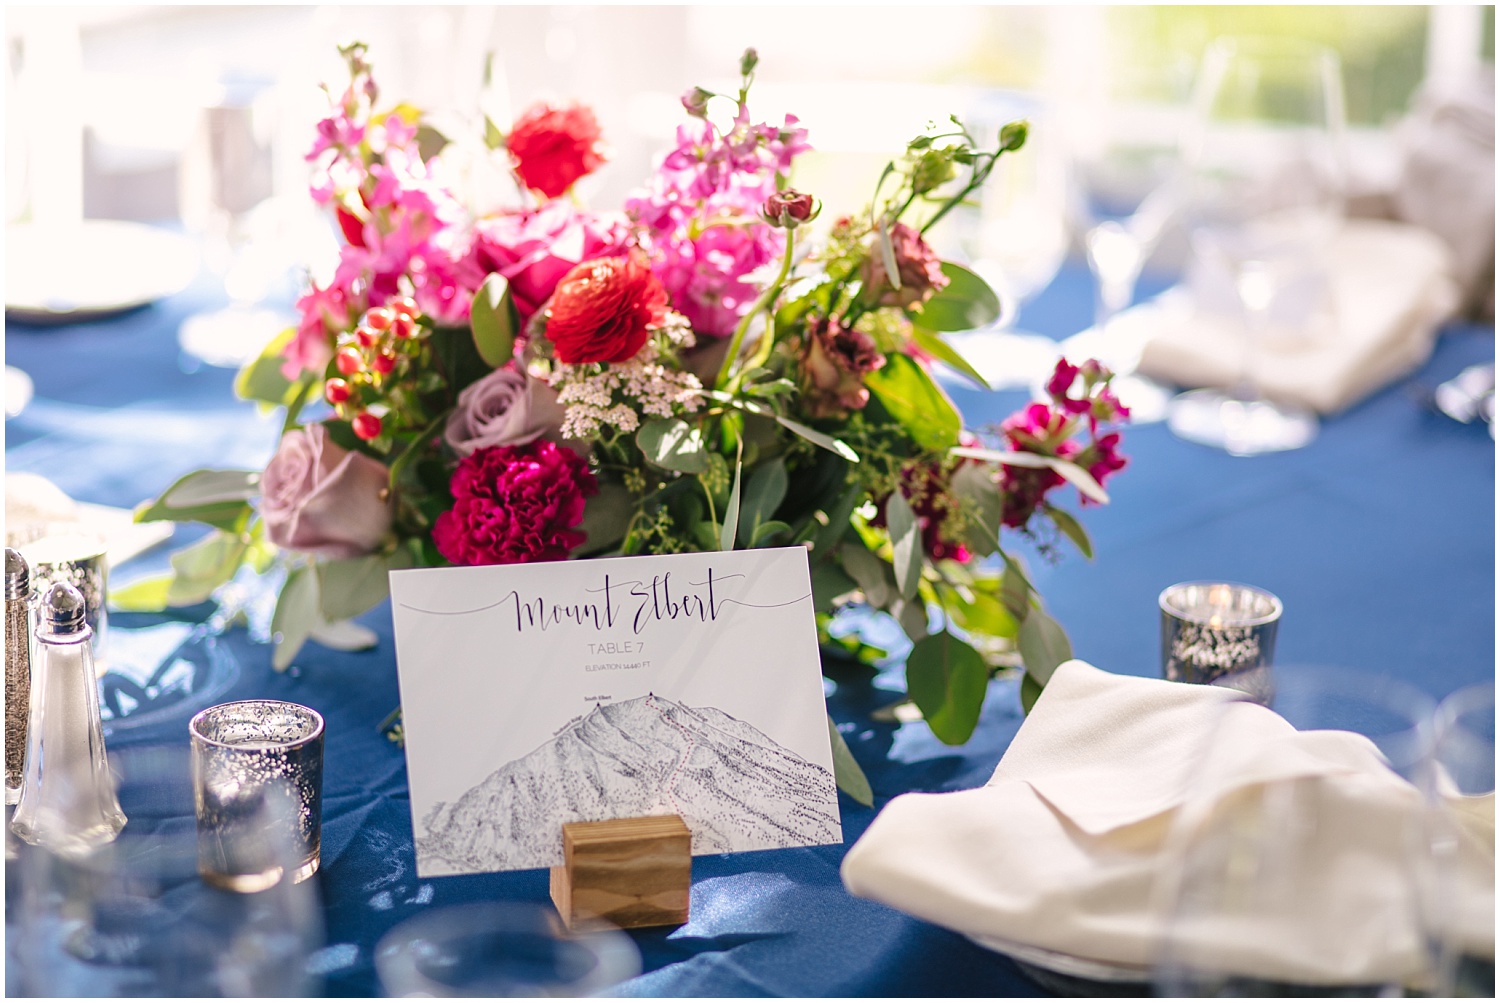 Mountain place cards and pink bouquet centerpieces at Ski Tip Lodge wedding in Keystone Colorado